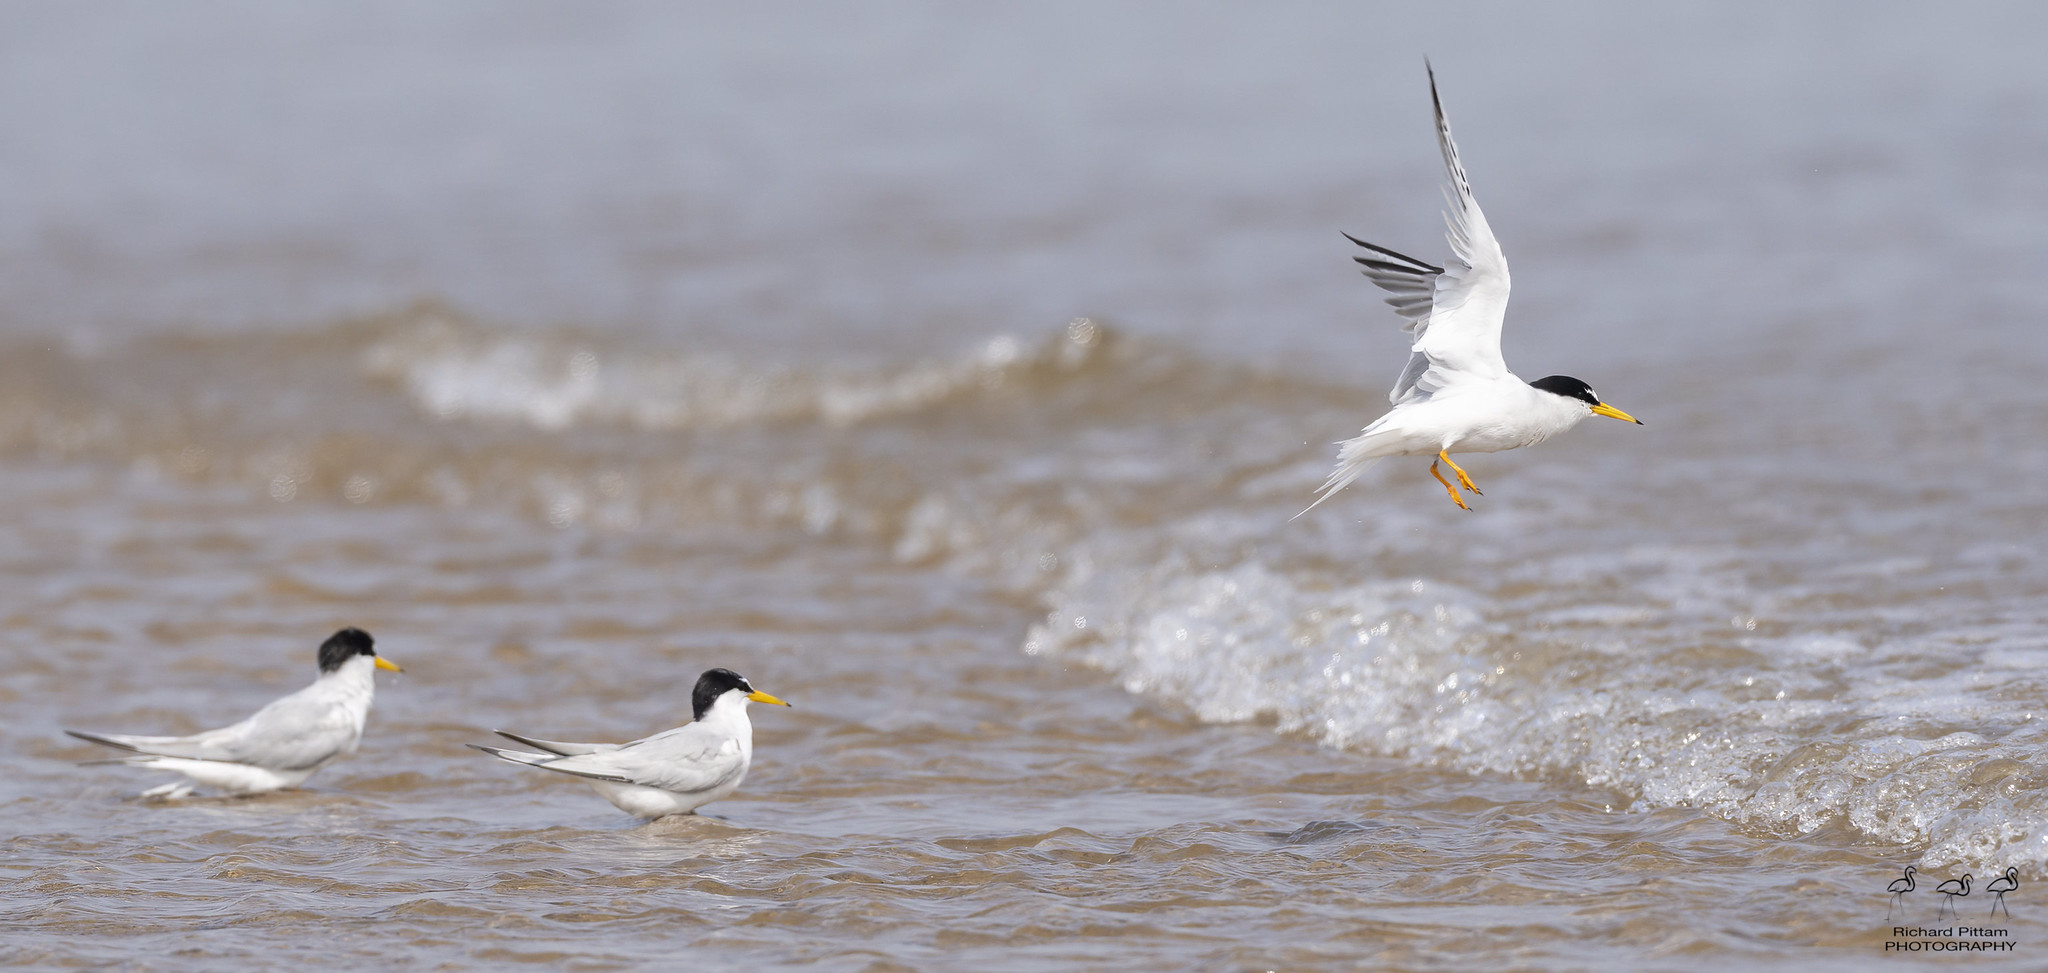 Little Tern - unfortunately as electricity and water don't mix - neither does photography and 30DegC  temperatures :-(